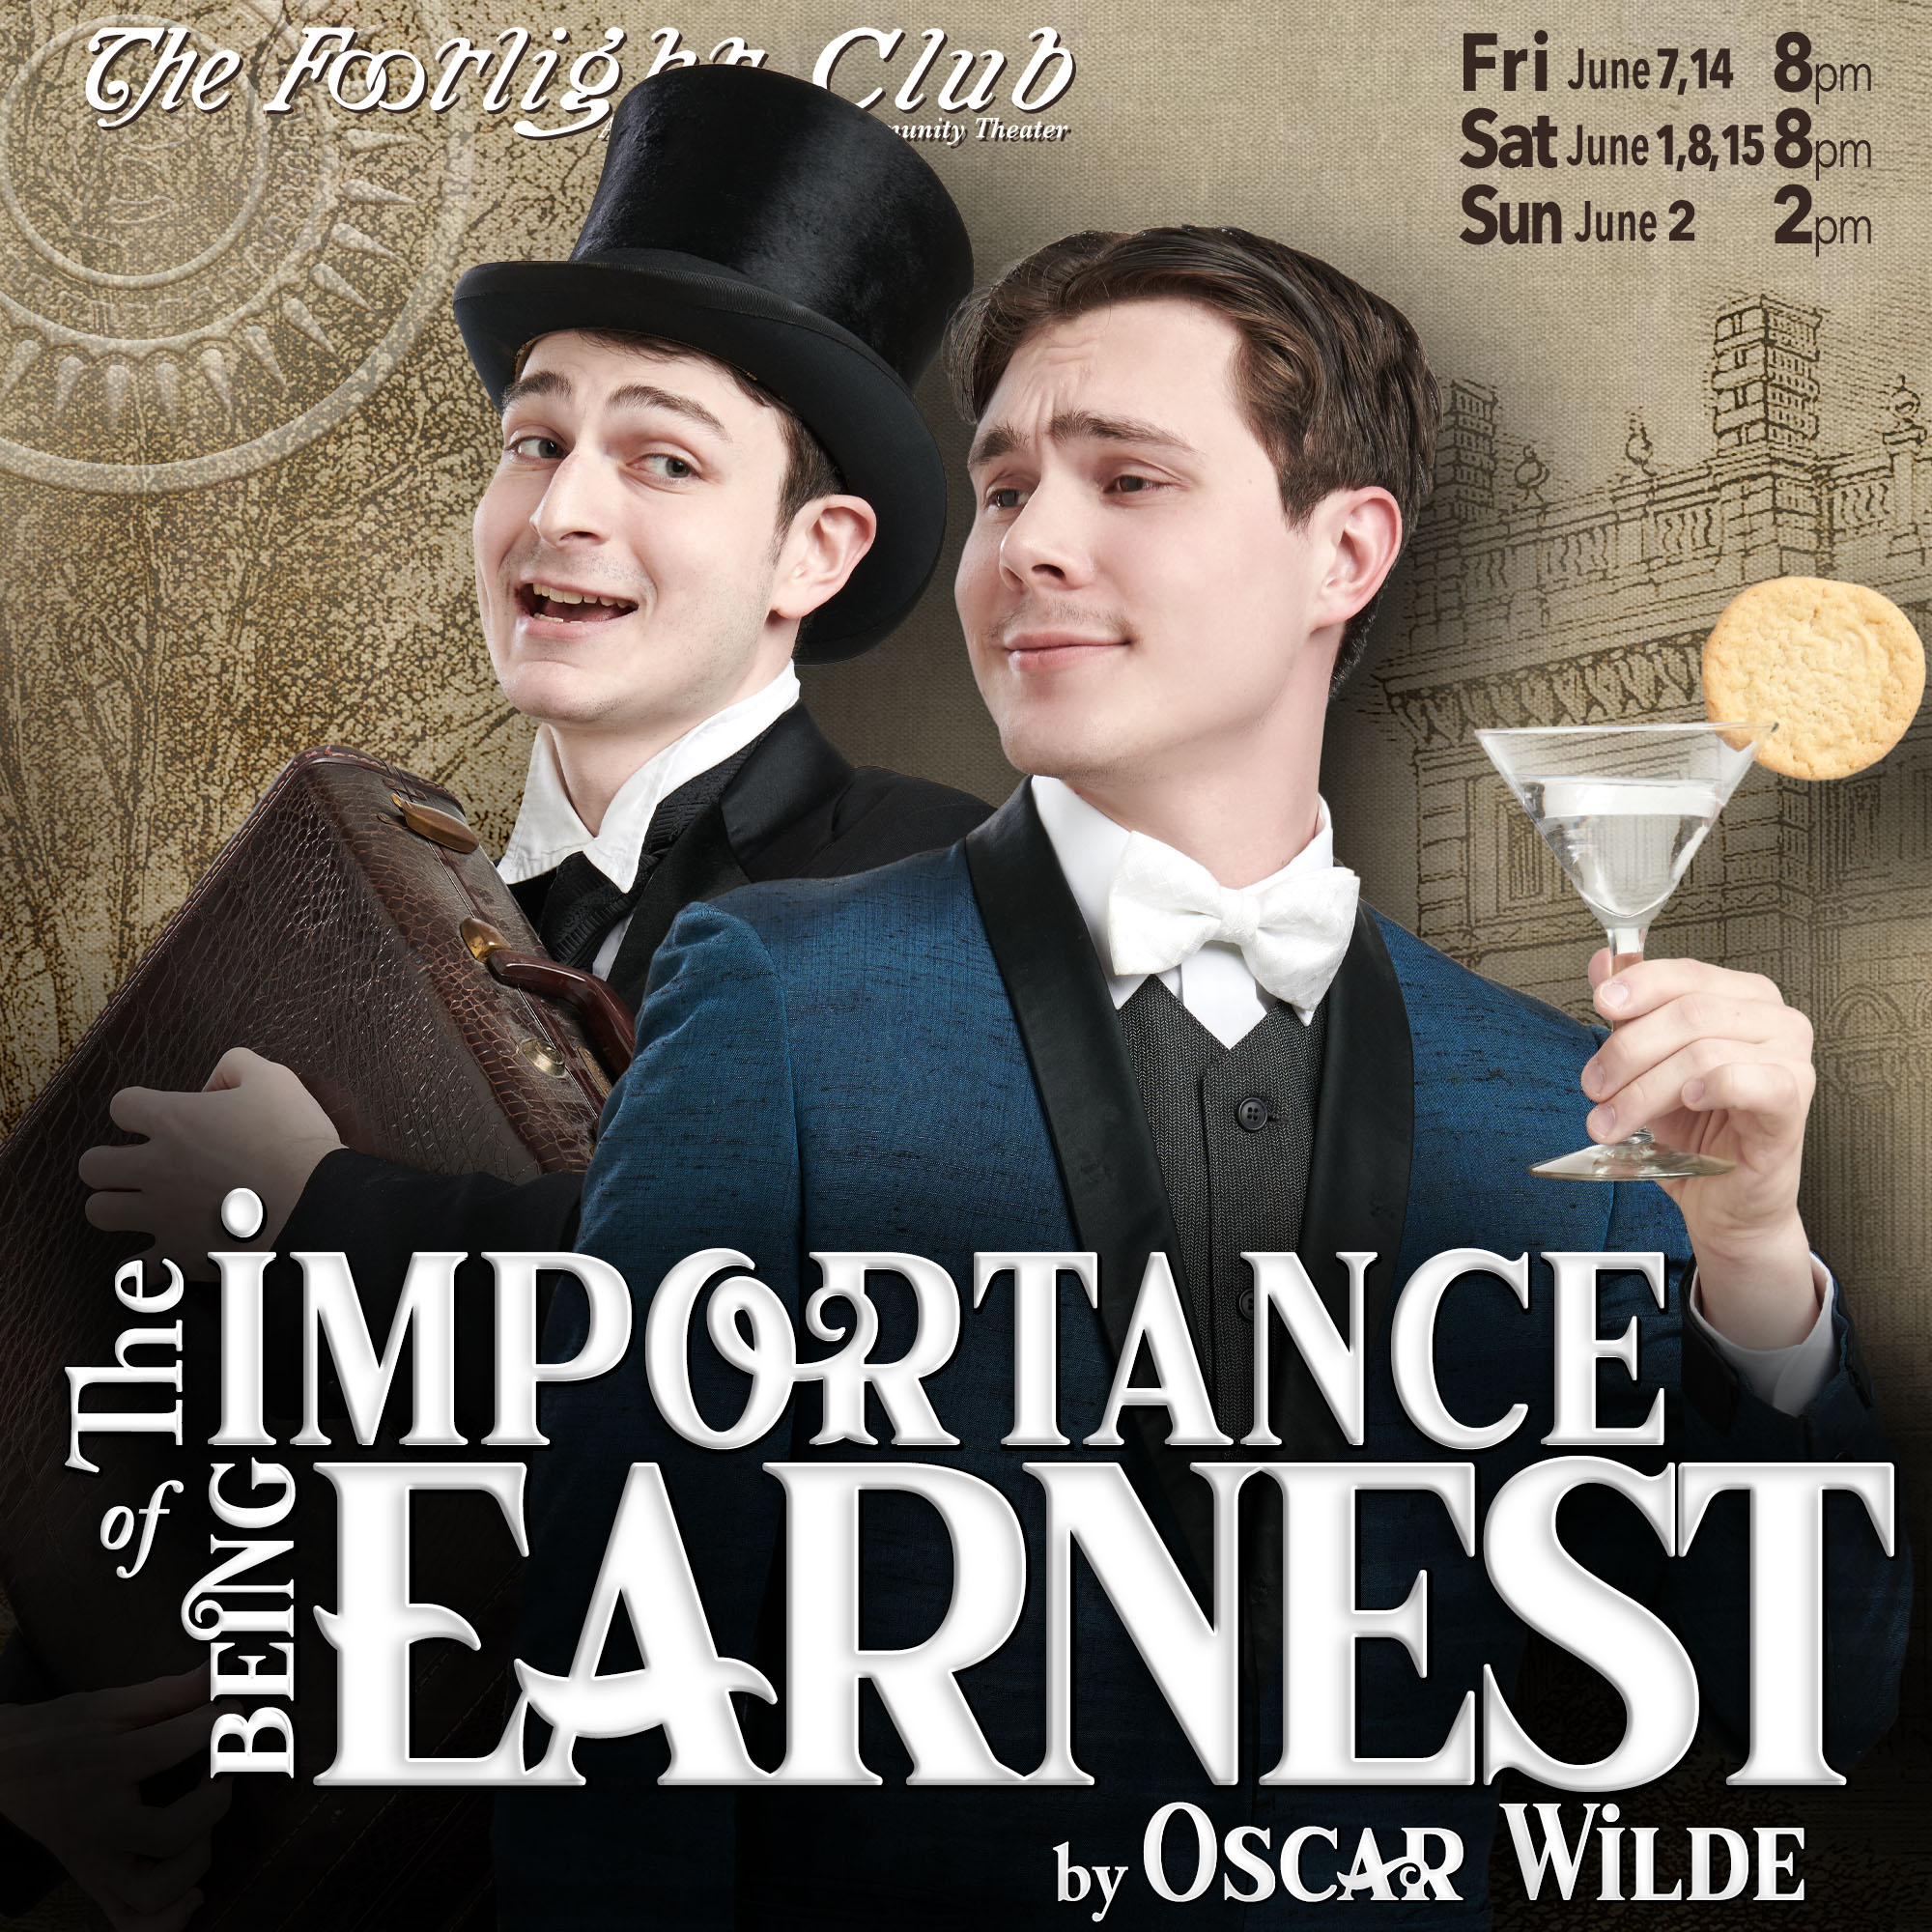 The Importance of Being Earnest play banner